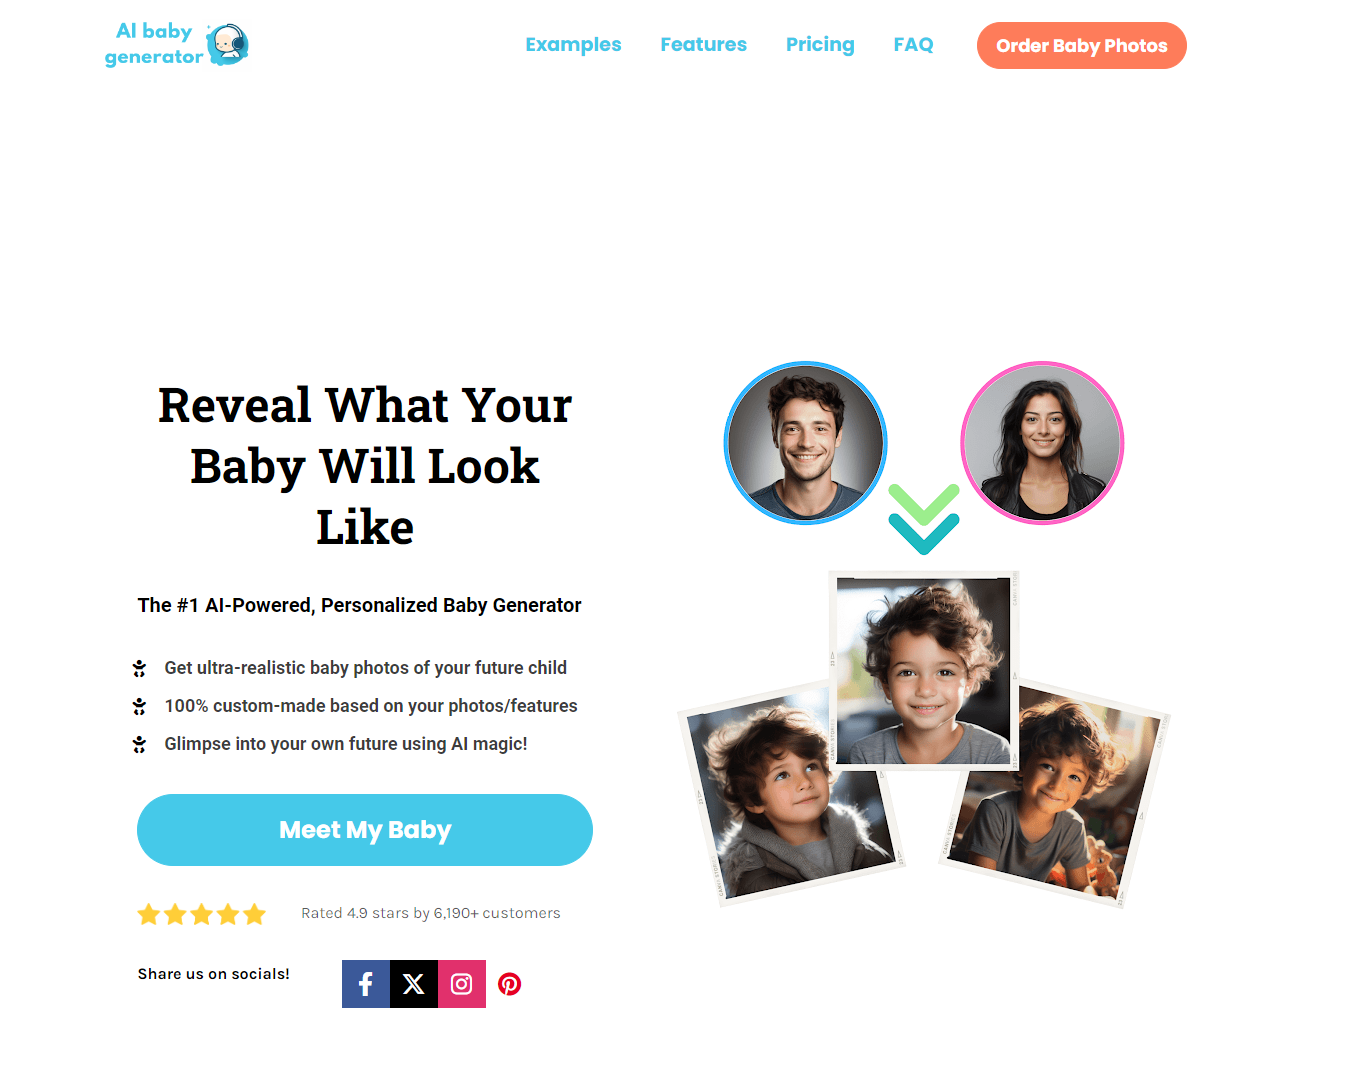 AI Baby Generator, reveal what your baby will look like